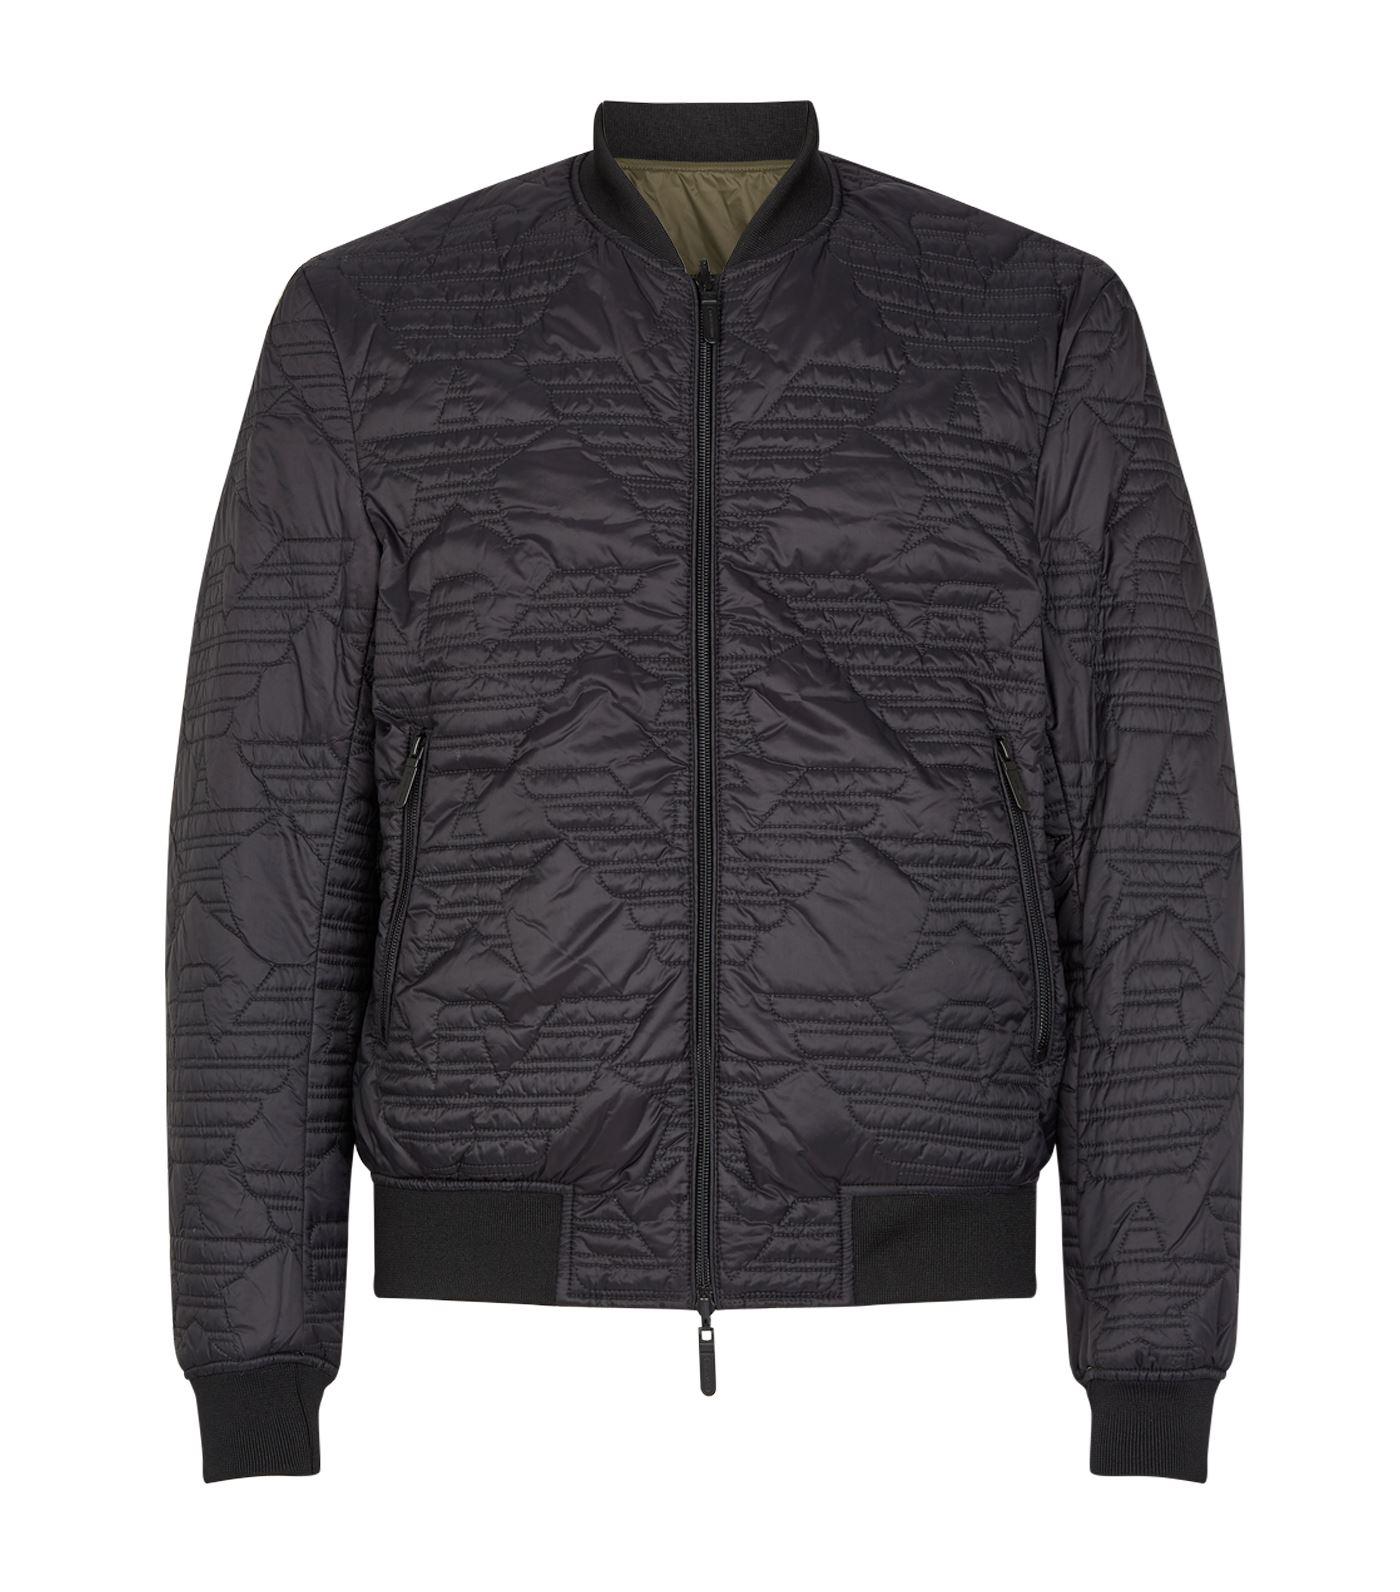 Emporio Armani Reversible Bomber Jacket in Green for Men - Lyst